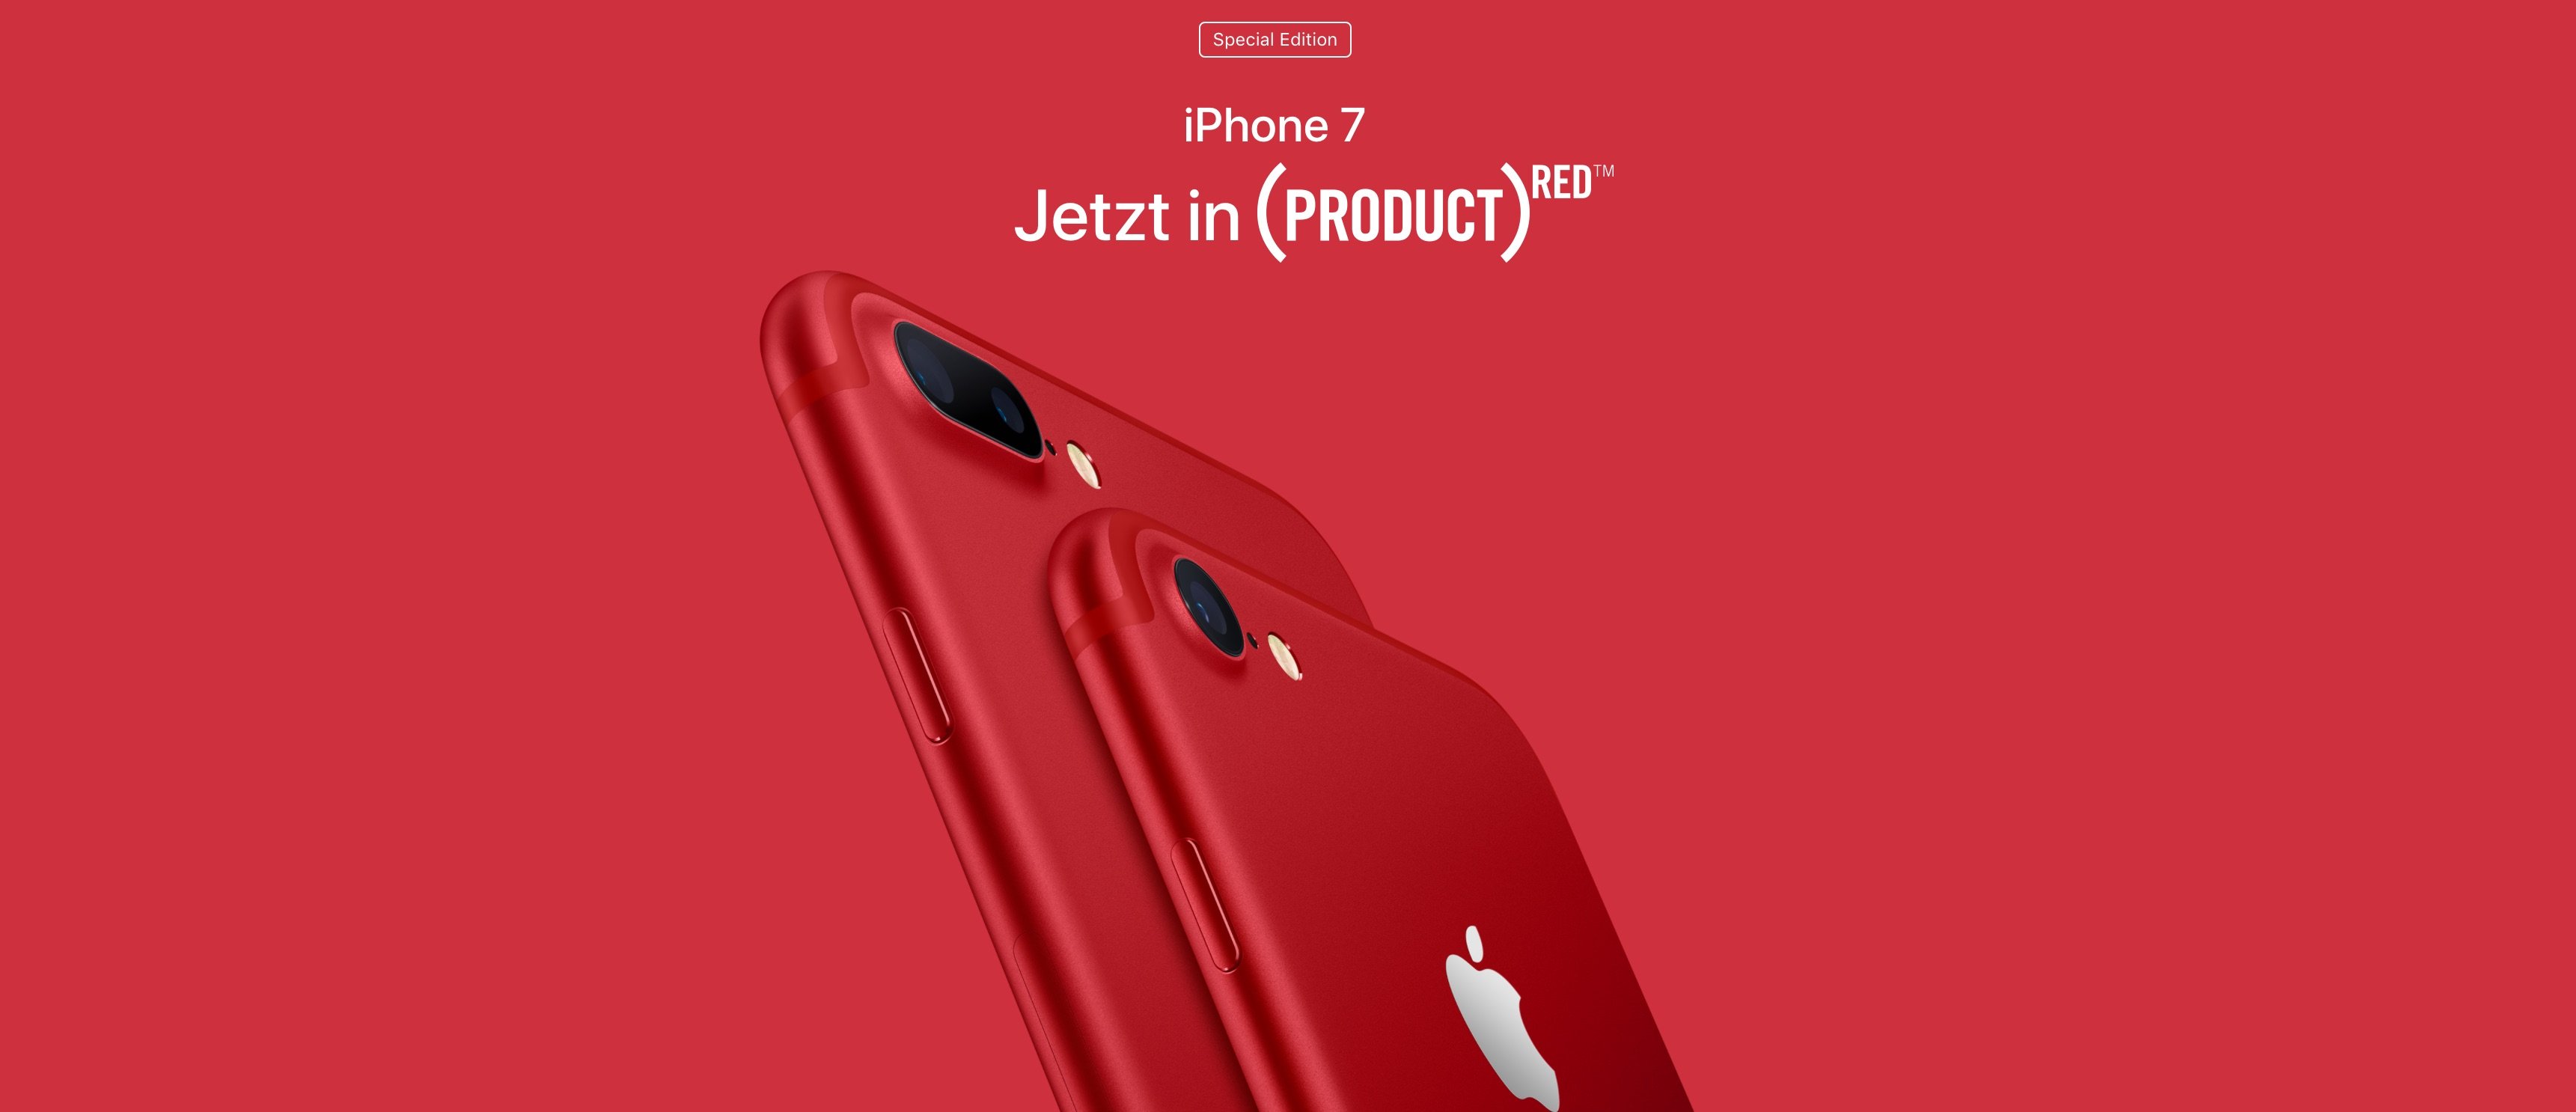 Apple iPhone 7 RED im Hands-on Video 1